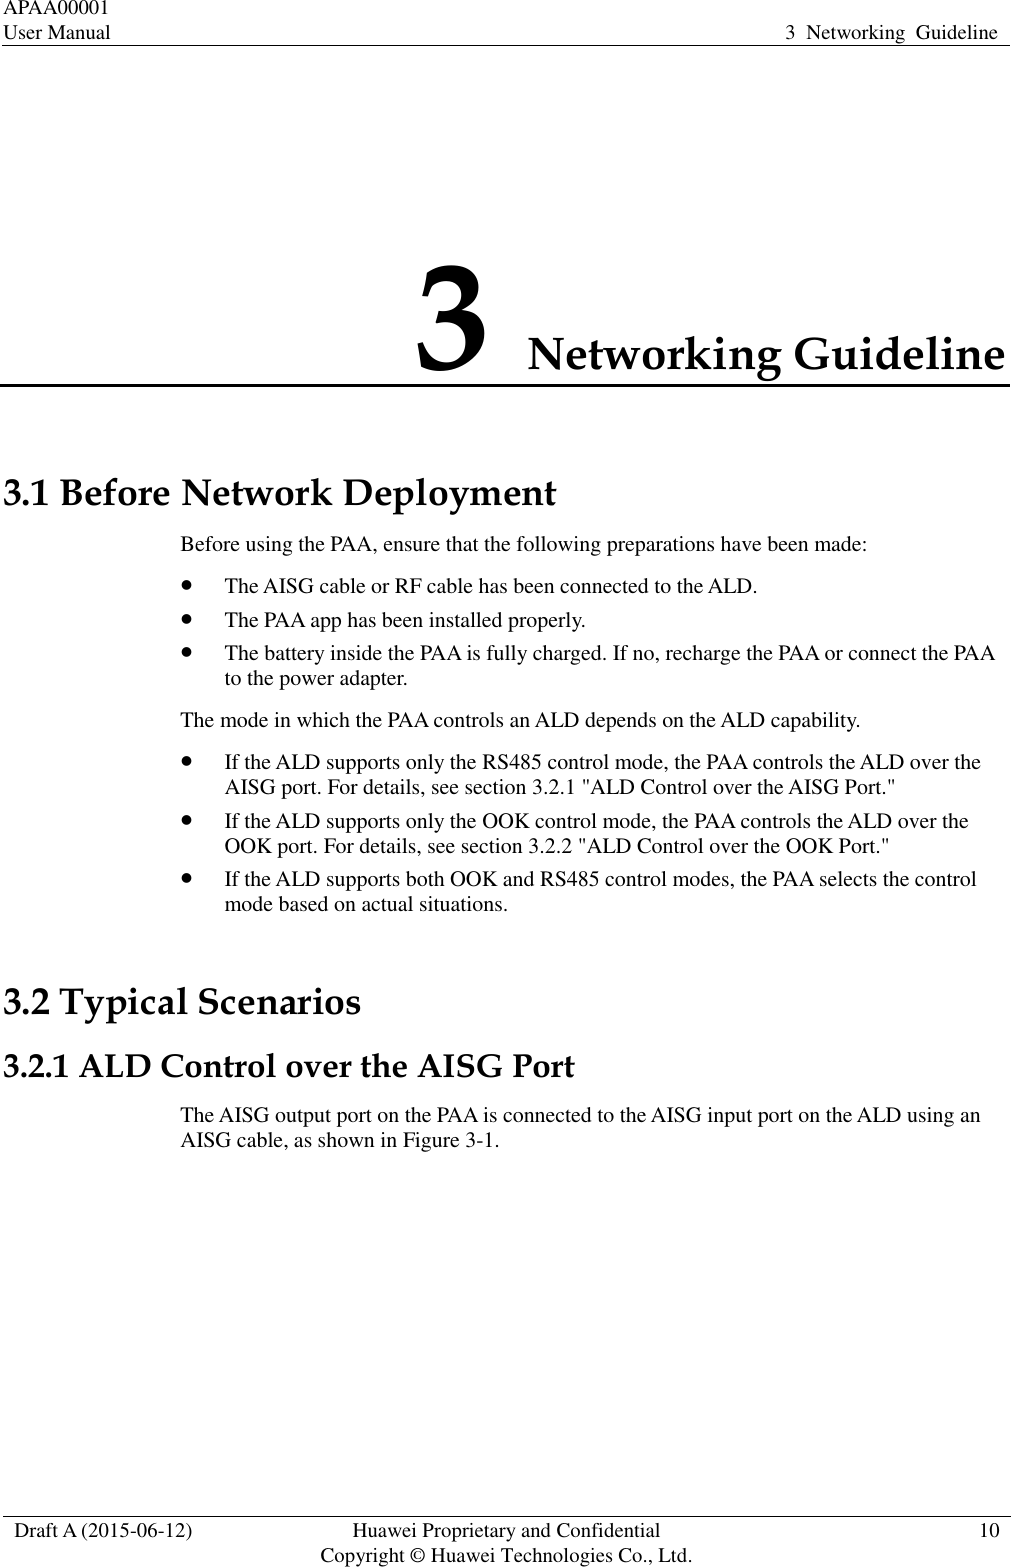 APAA00001 User Manual 3  Networking  Guideline  Draft A (2015-06-12) Huawei Proprietary and Confidential           Copyright © Huawei Technologies Co., Ltd. 10  3 Networking Guideline 3.1 Before Network Deployment Before using the PAA, ensure that the following preparations have been made:  The AISG cable or RF cable has been connected to the ALD.    The PAA app has been installed properly.    The battery inside the PAA is fully charged. If no, recharge the PAA or connect the PAA to the power adapter.   The mode in which the PAA controls an ALD depends on the ALD capability.    If the ALD supports only the RS485 control mode, the PAA controls the ALD over the AISG port. For details, see section 3.2.1 &quot;ALD Control over the AISG Port.&quot;  If the ALD supports only the OOK control mode, the PAA controls the ALD over the OOK port. For details, see section 3.2.2 &quot;ALD Control over the OOK Port.&quot;  If the ALD supports both OOK and RS485 control modes, the PAA selects the control mode based on actual situations.   3.2 Typical Scenarios 3.2.1 ALD Control over the AISG Port The AISG output port on the PAA is connected to the AISG input port on the ALD using an AISG cable, as shown in Figure 3-1.   